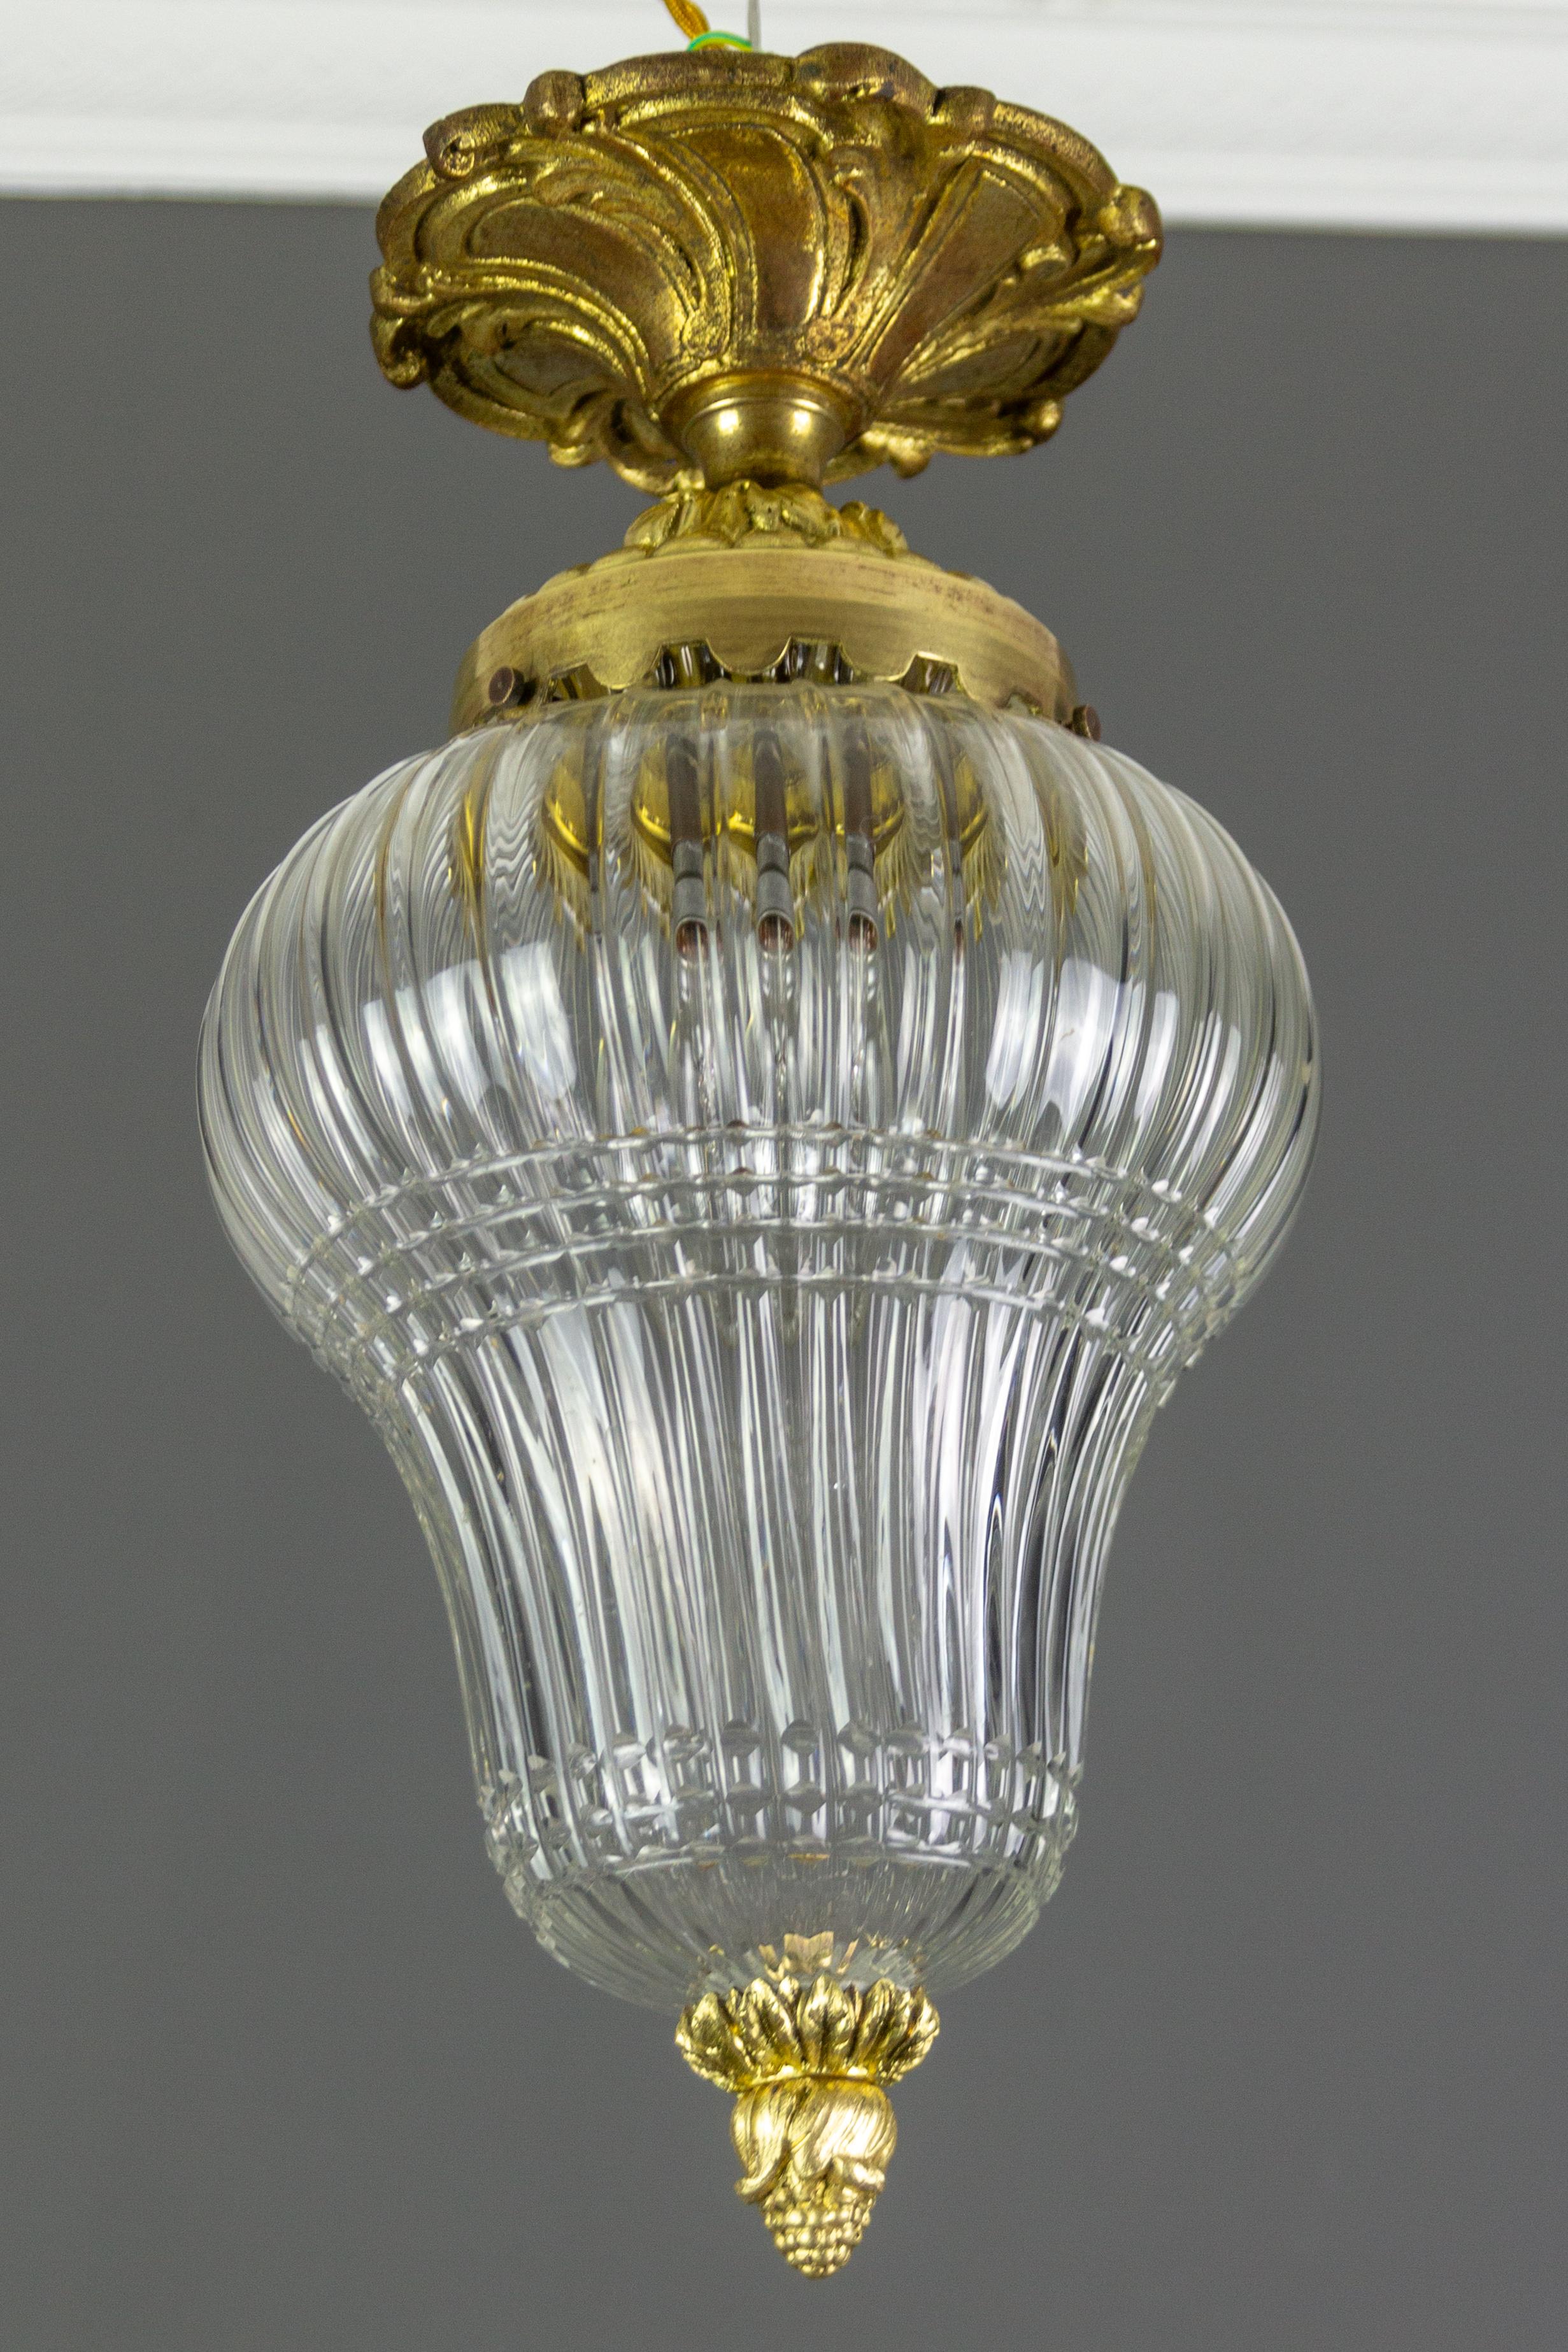 This adorable antique French ceiling light features a very decorative massive bronze fixture and beautifully shaped glass lampshade, centered with a bronze pinecone finial.
One socket for a B22-size light bulb.
Dimensions: height: 38 cm / 14.96 in;